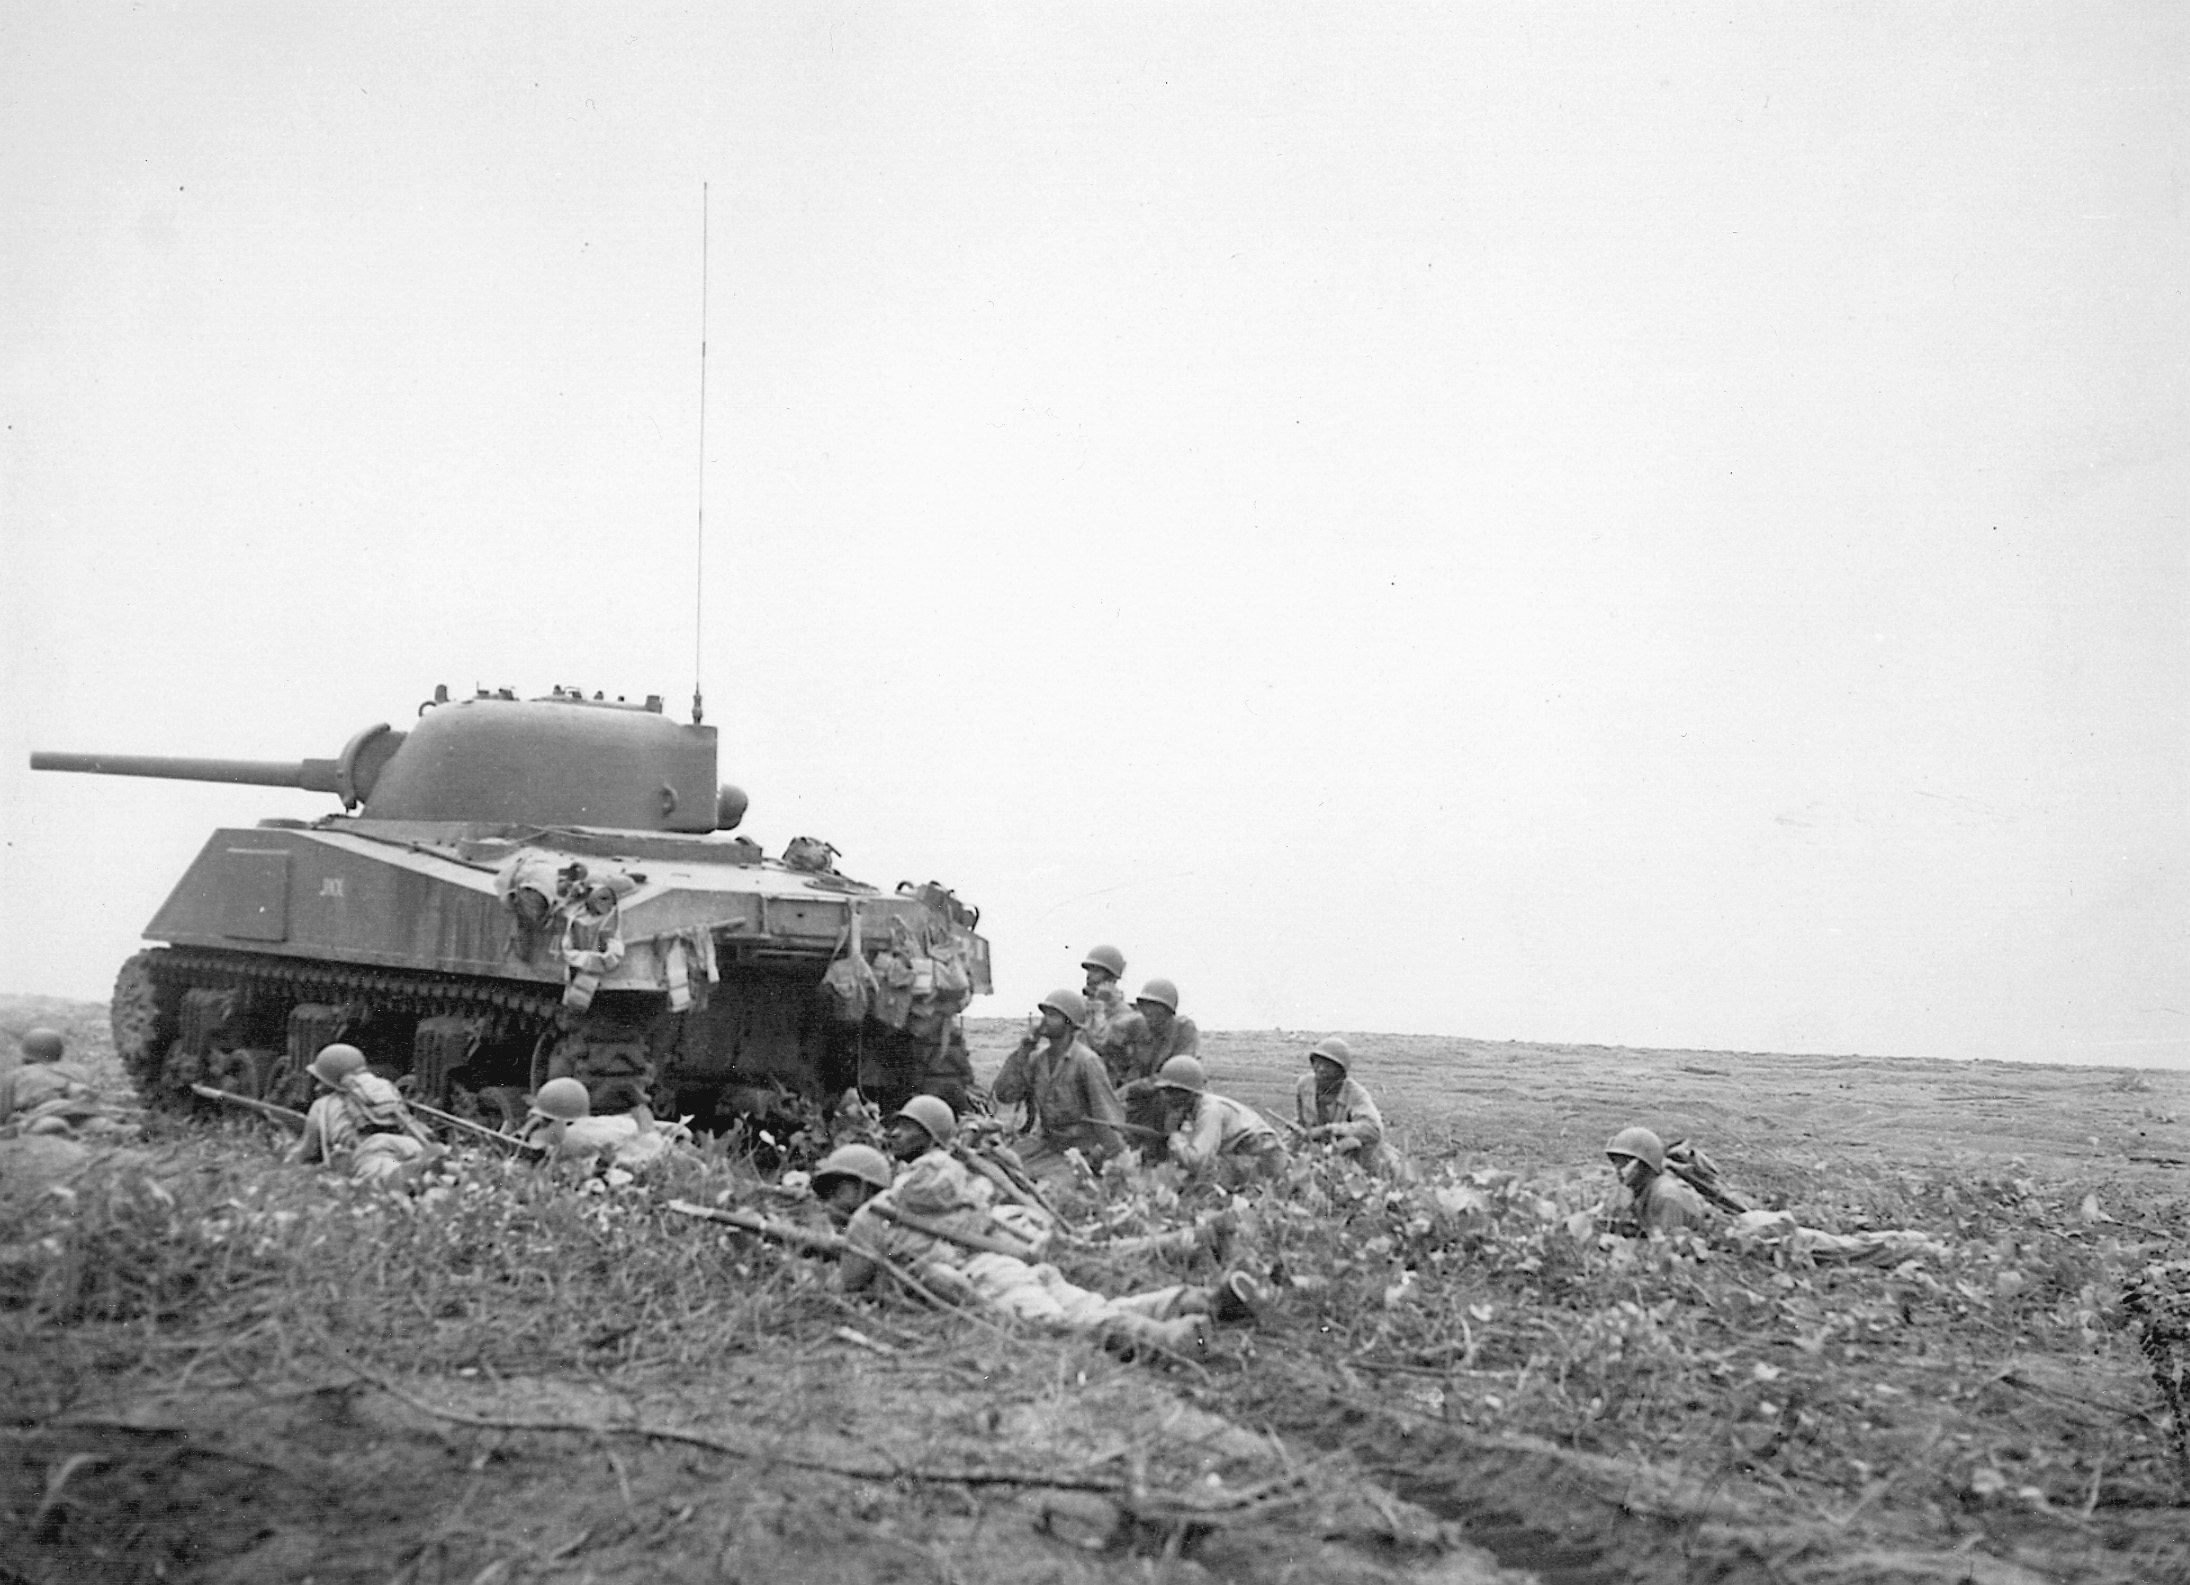 African American troops of the 24th Infantry Regiment advance behind a U.S. Sherman tank at Empress Bay, Bougainville. 